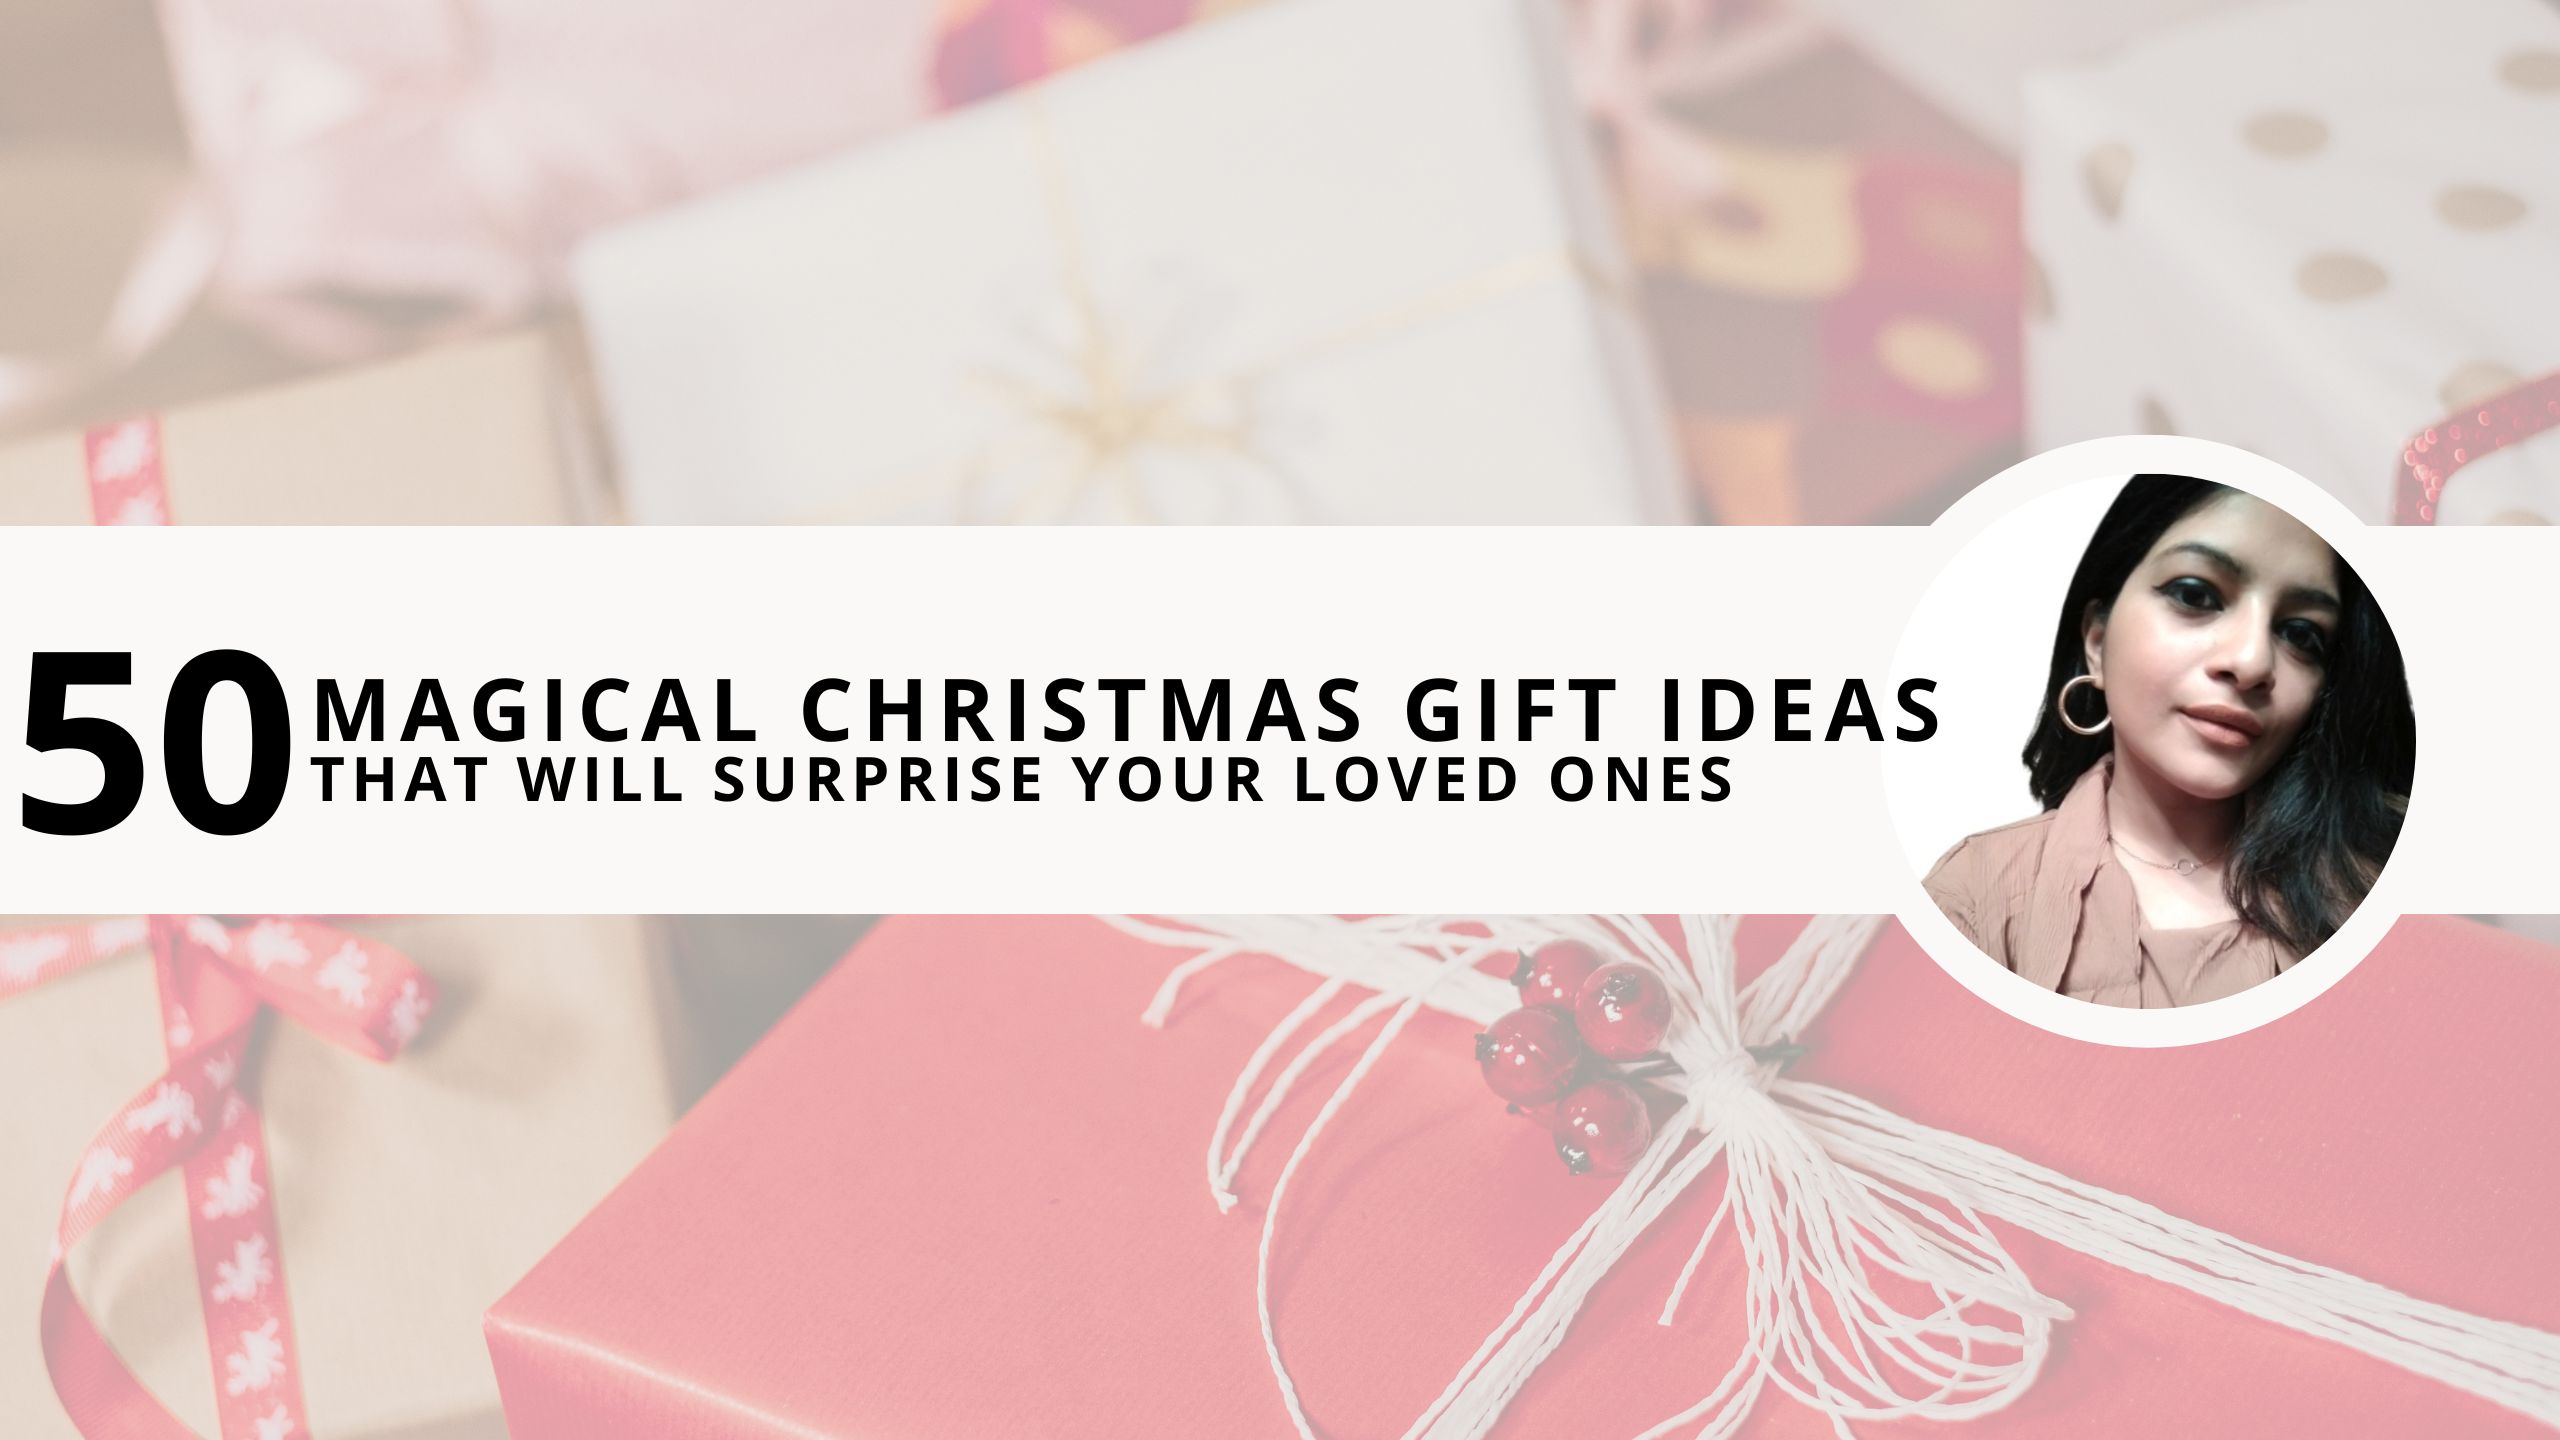 The Best Holiday Gifts For Your Loved Ones | Puffy Blog